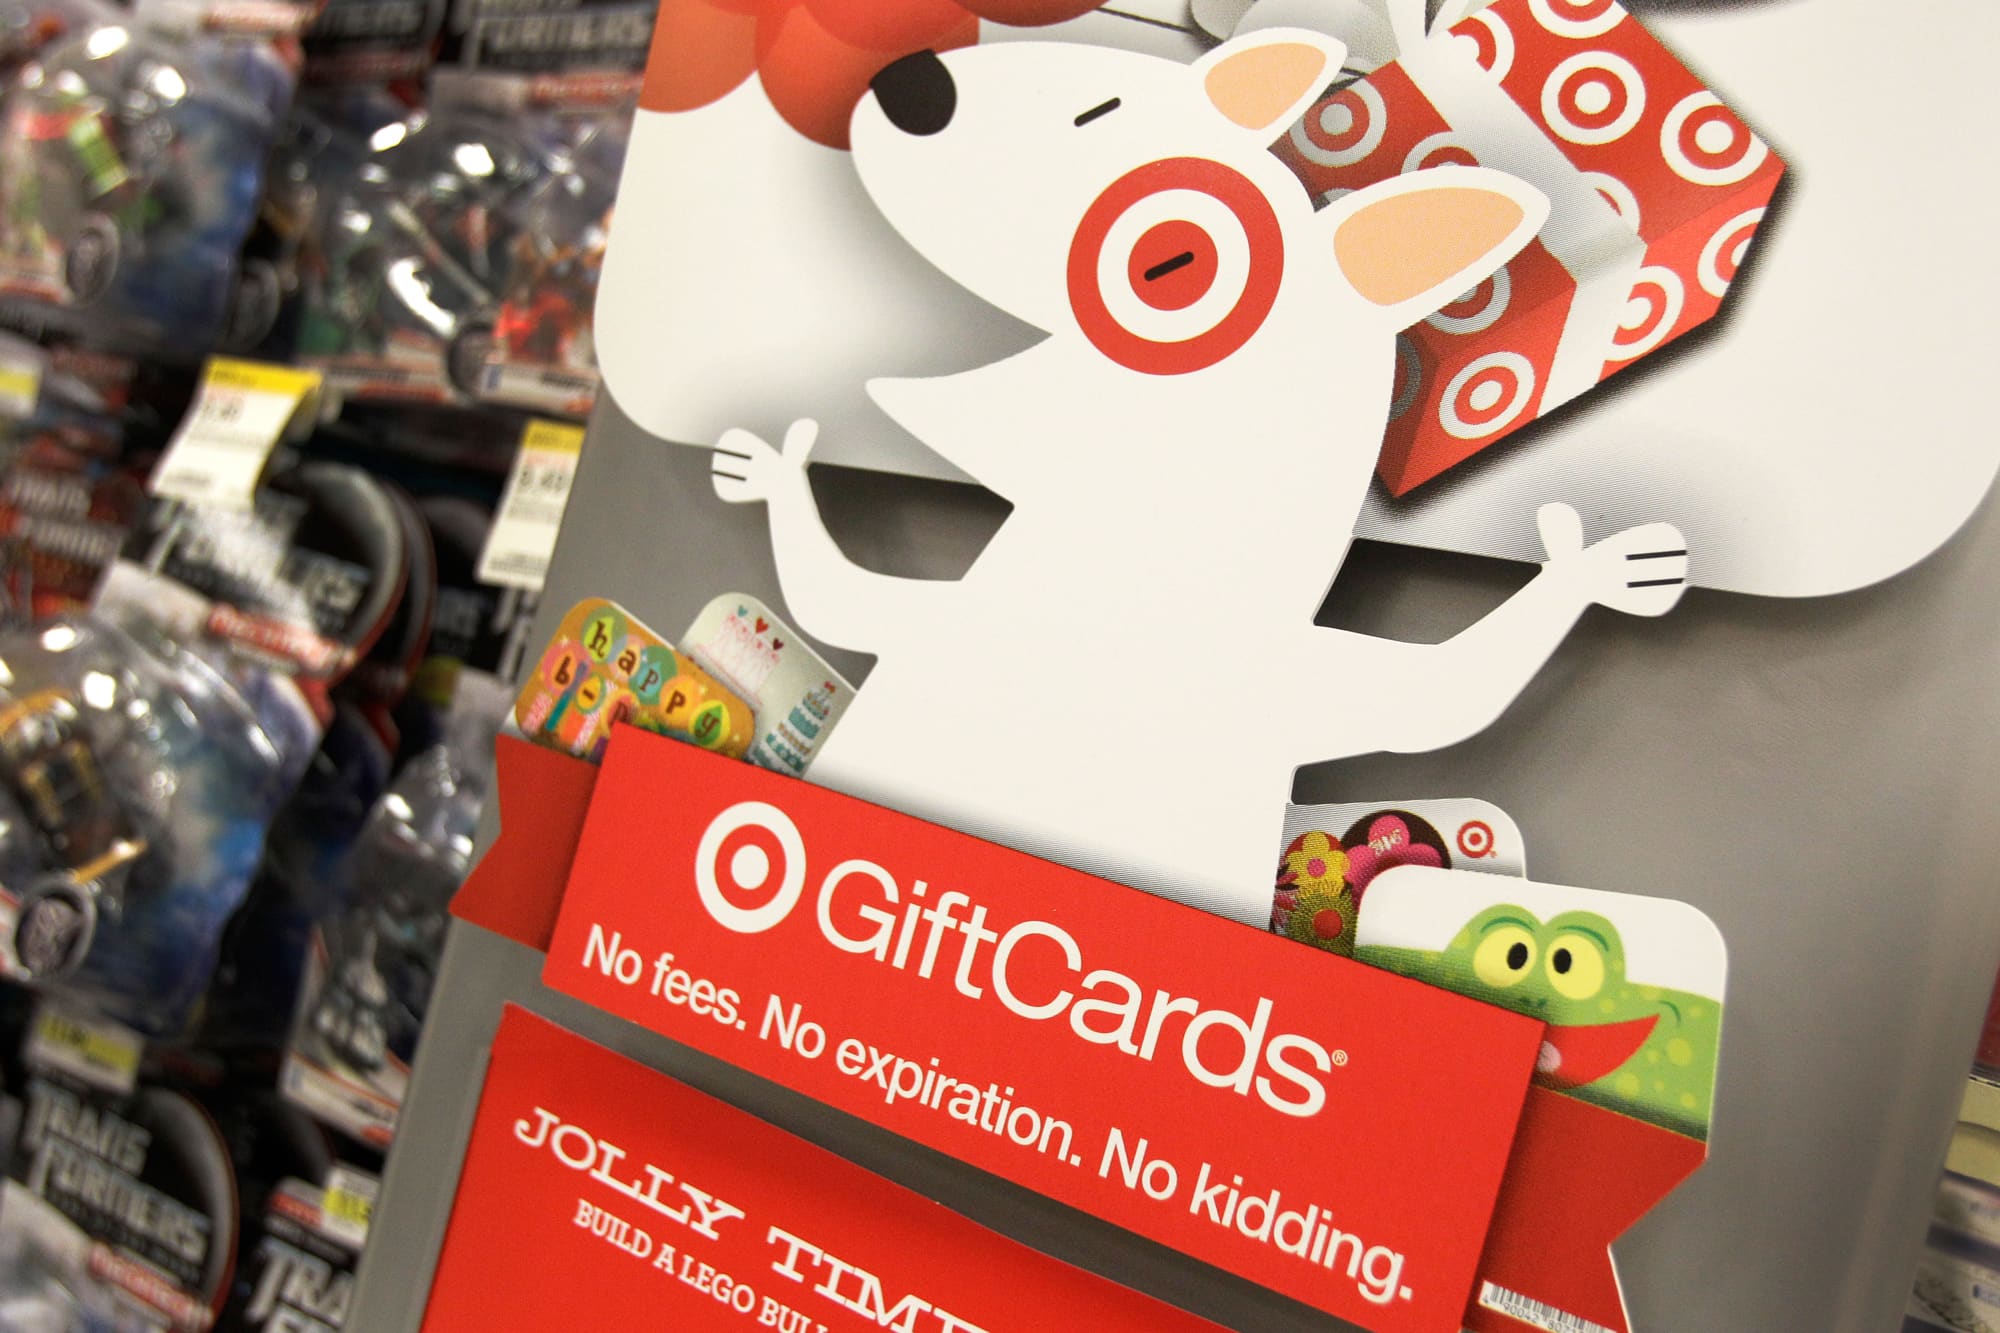 Some Target holiday gift cards were not activated